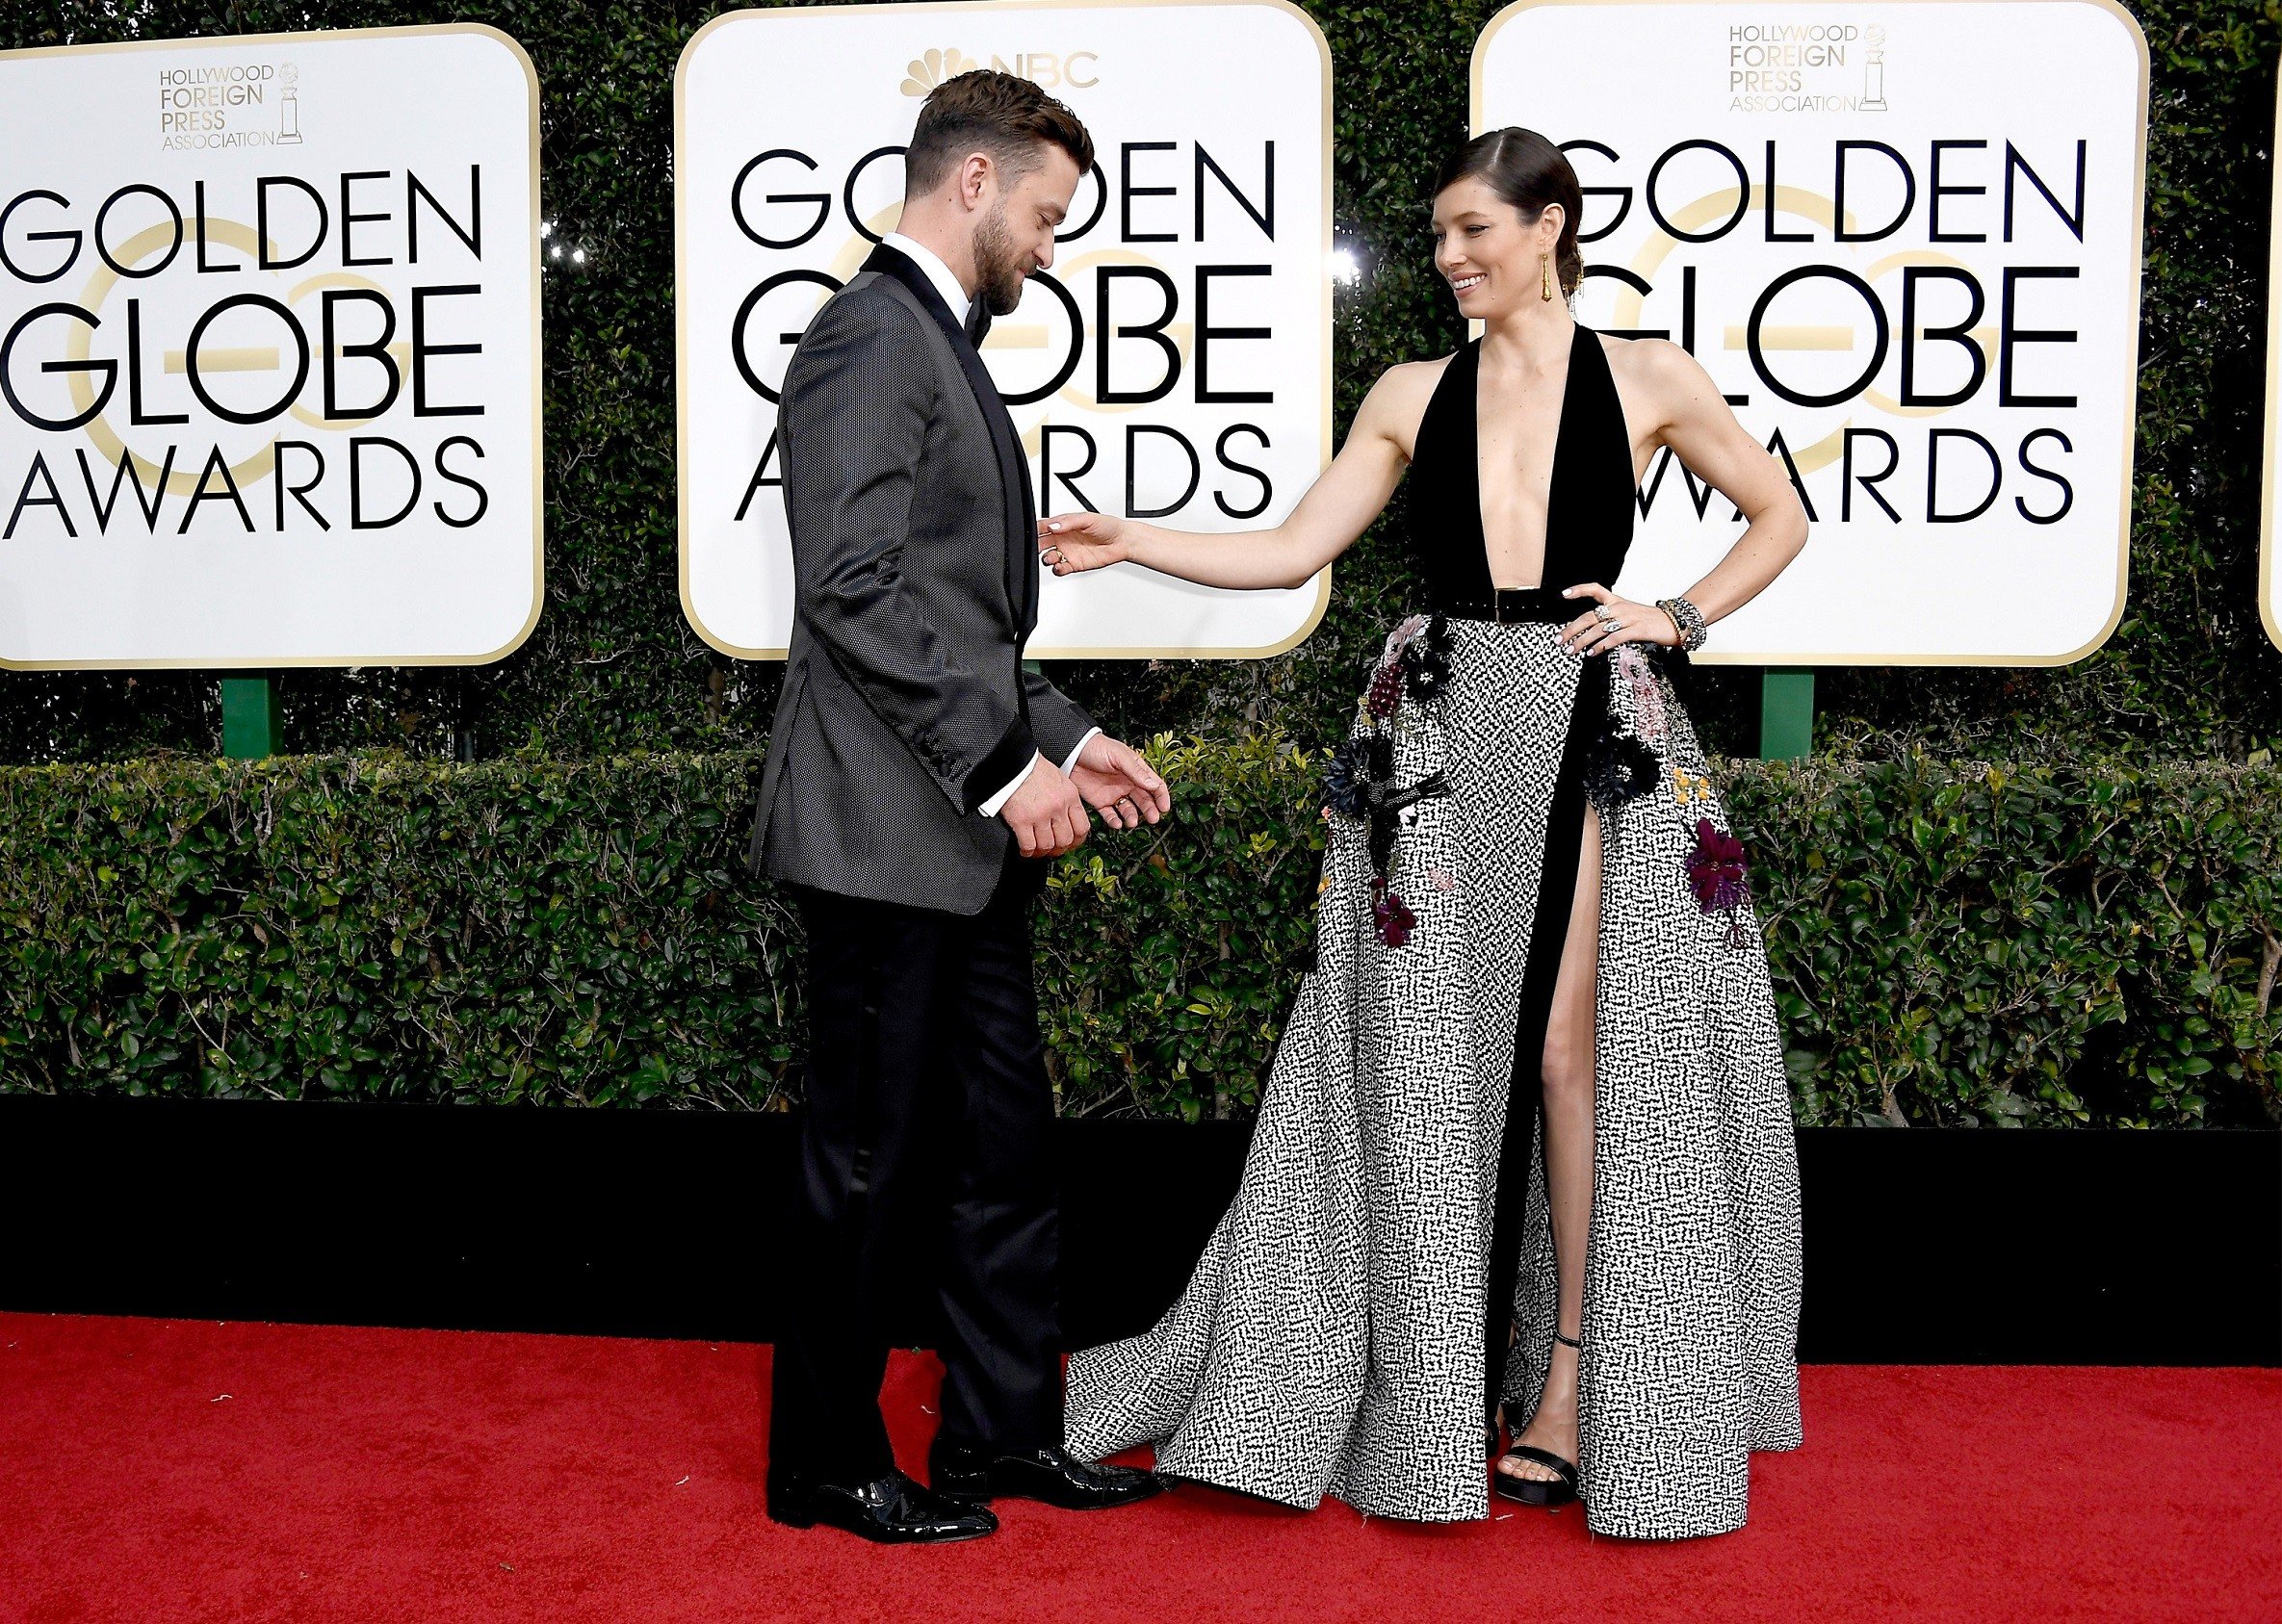 Justin Timberlake and Jessica Biel posing for photographers on a red carpet.